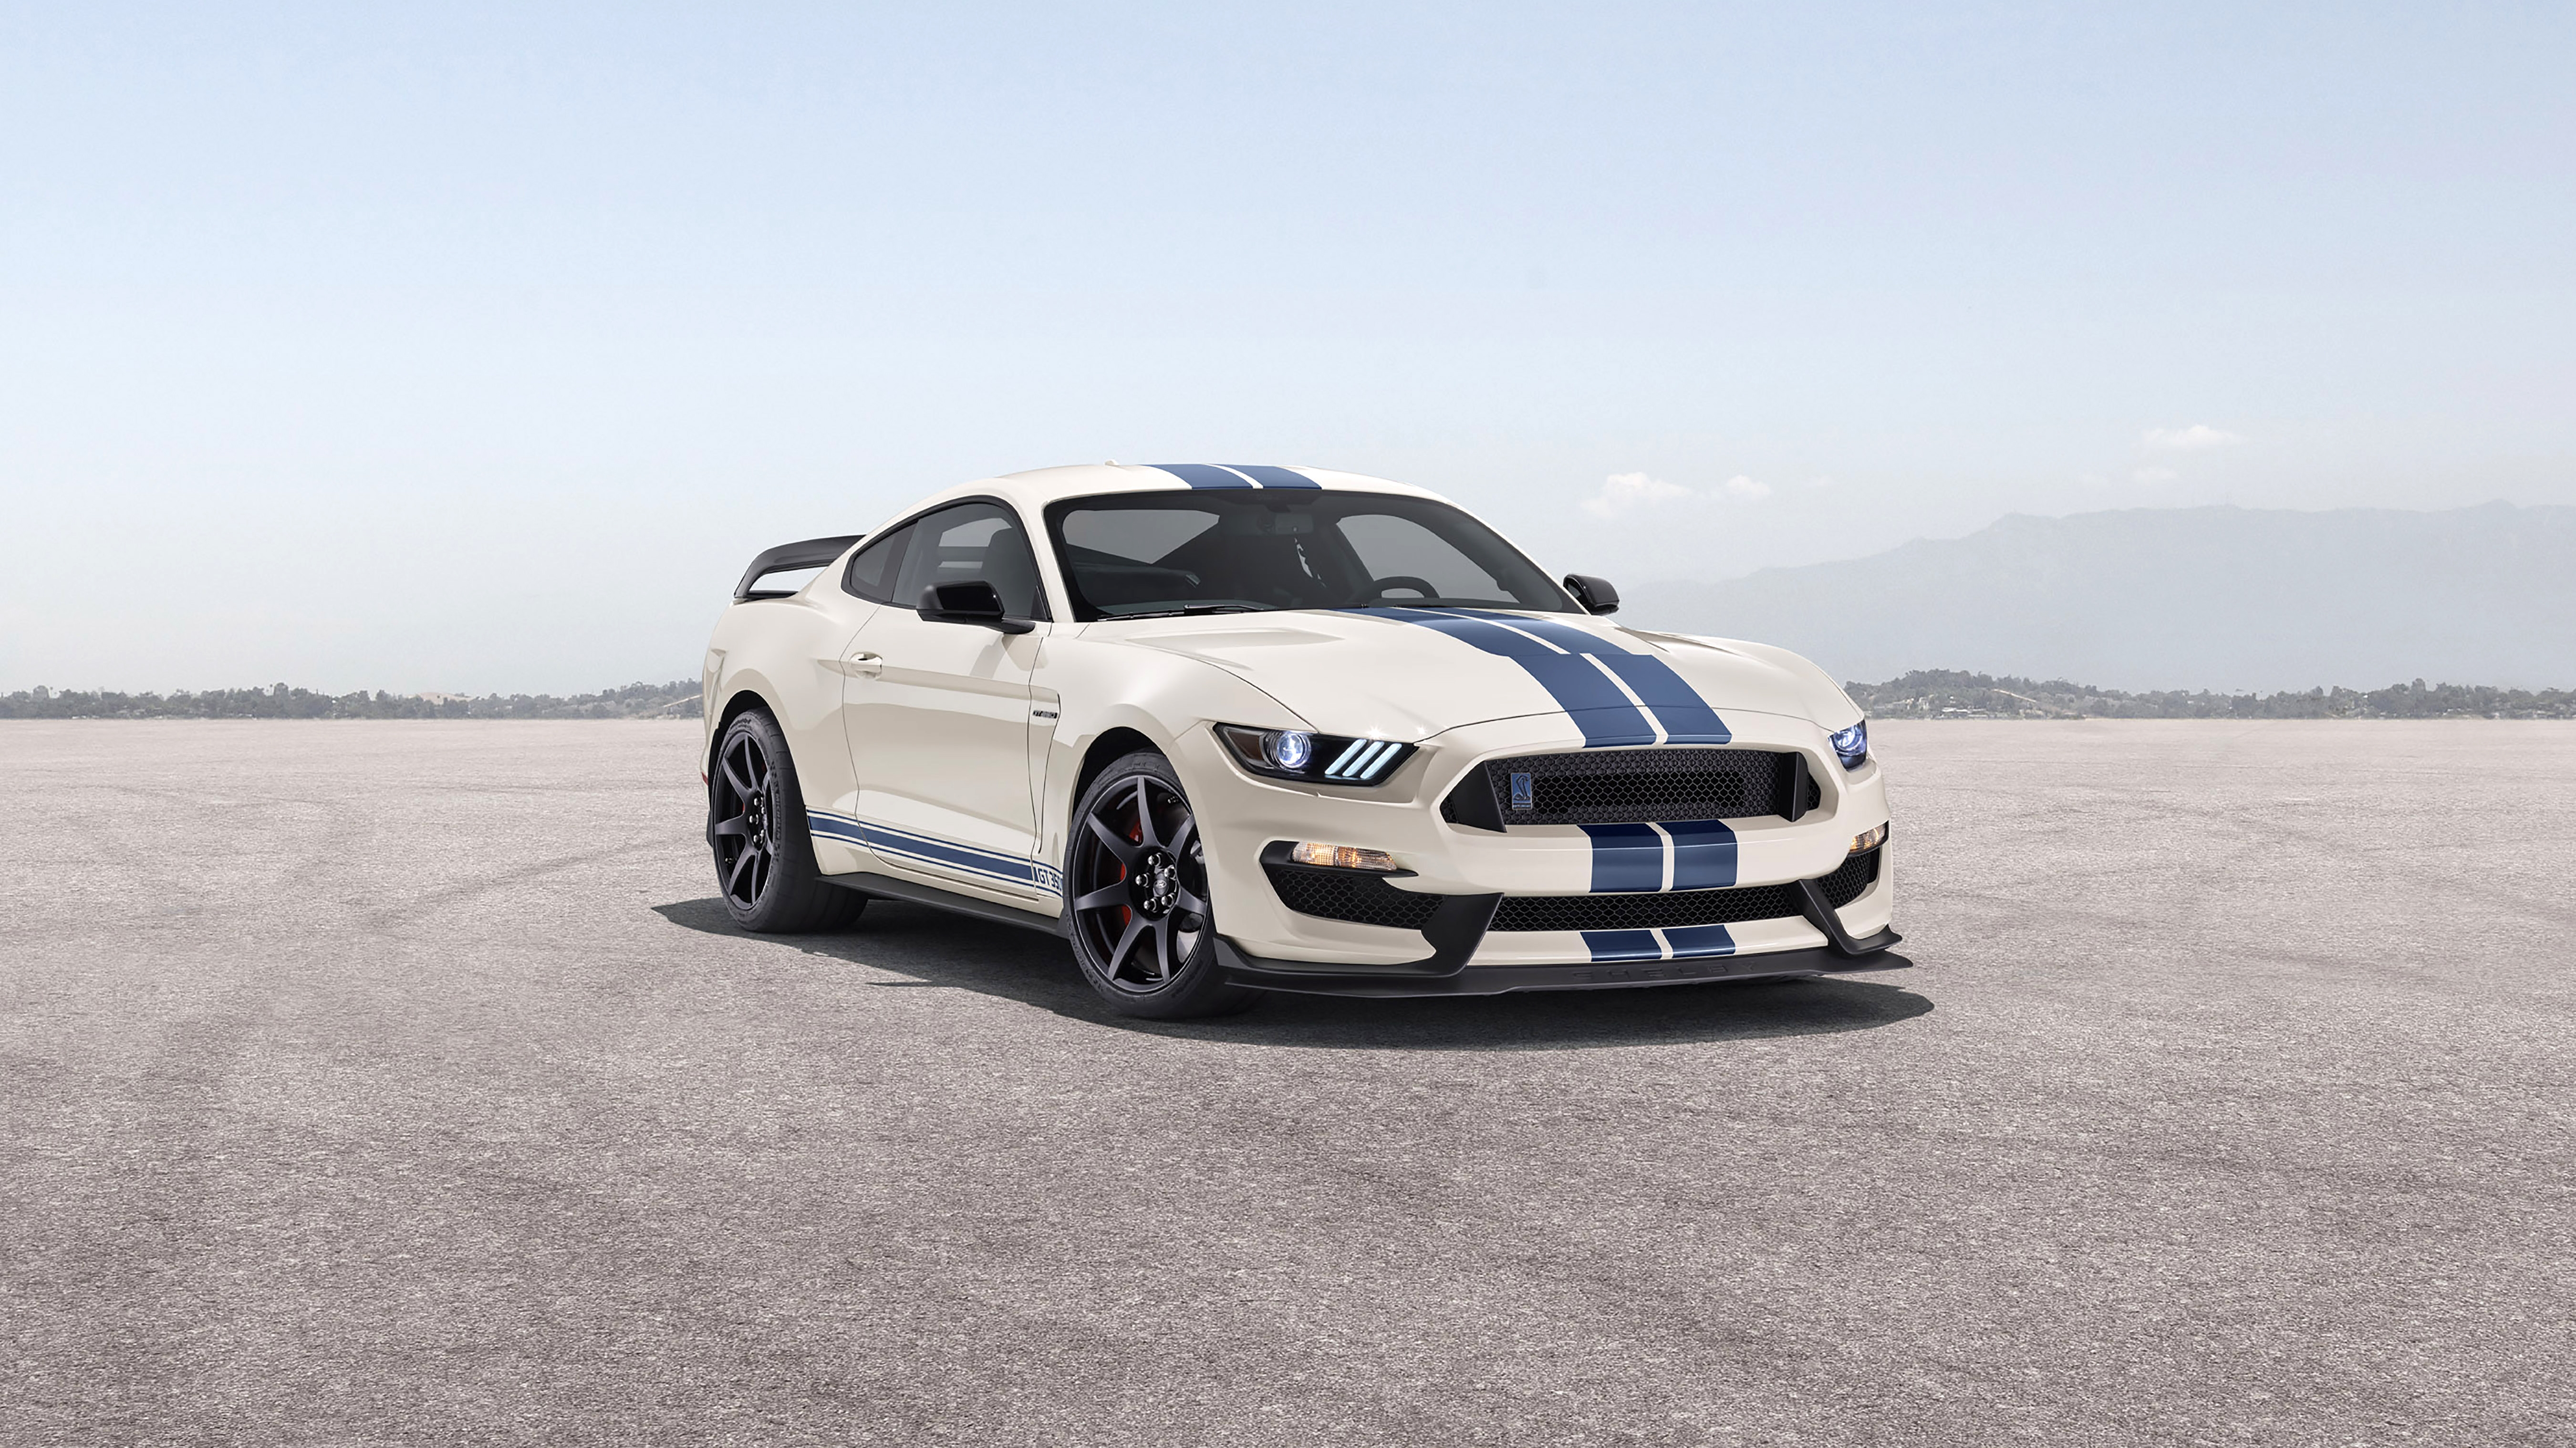 HD wallpaper, 5K, 2020, Heritage Edition, Ford Mustang Shelby Gt350